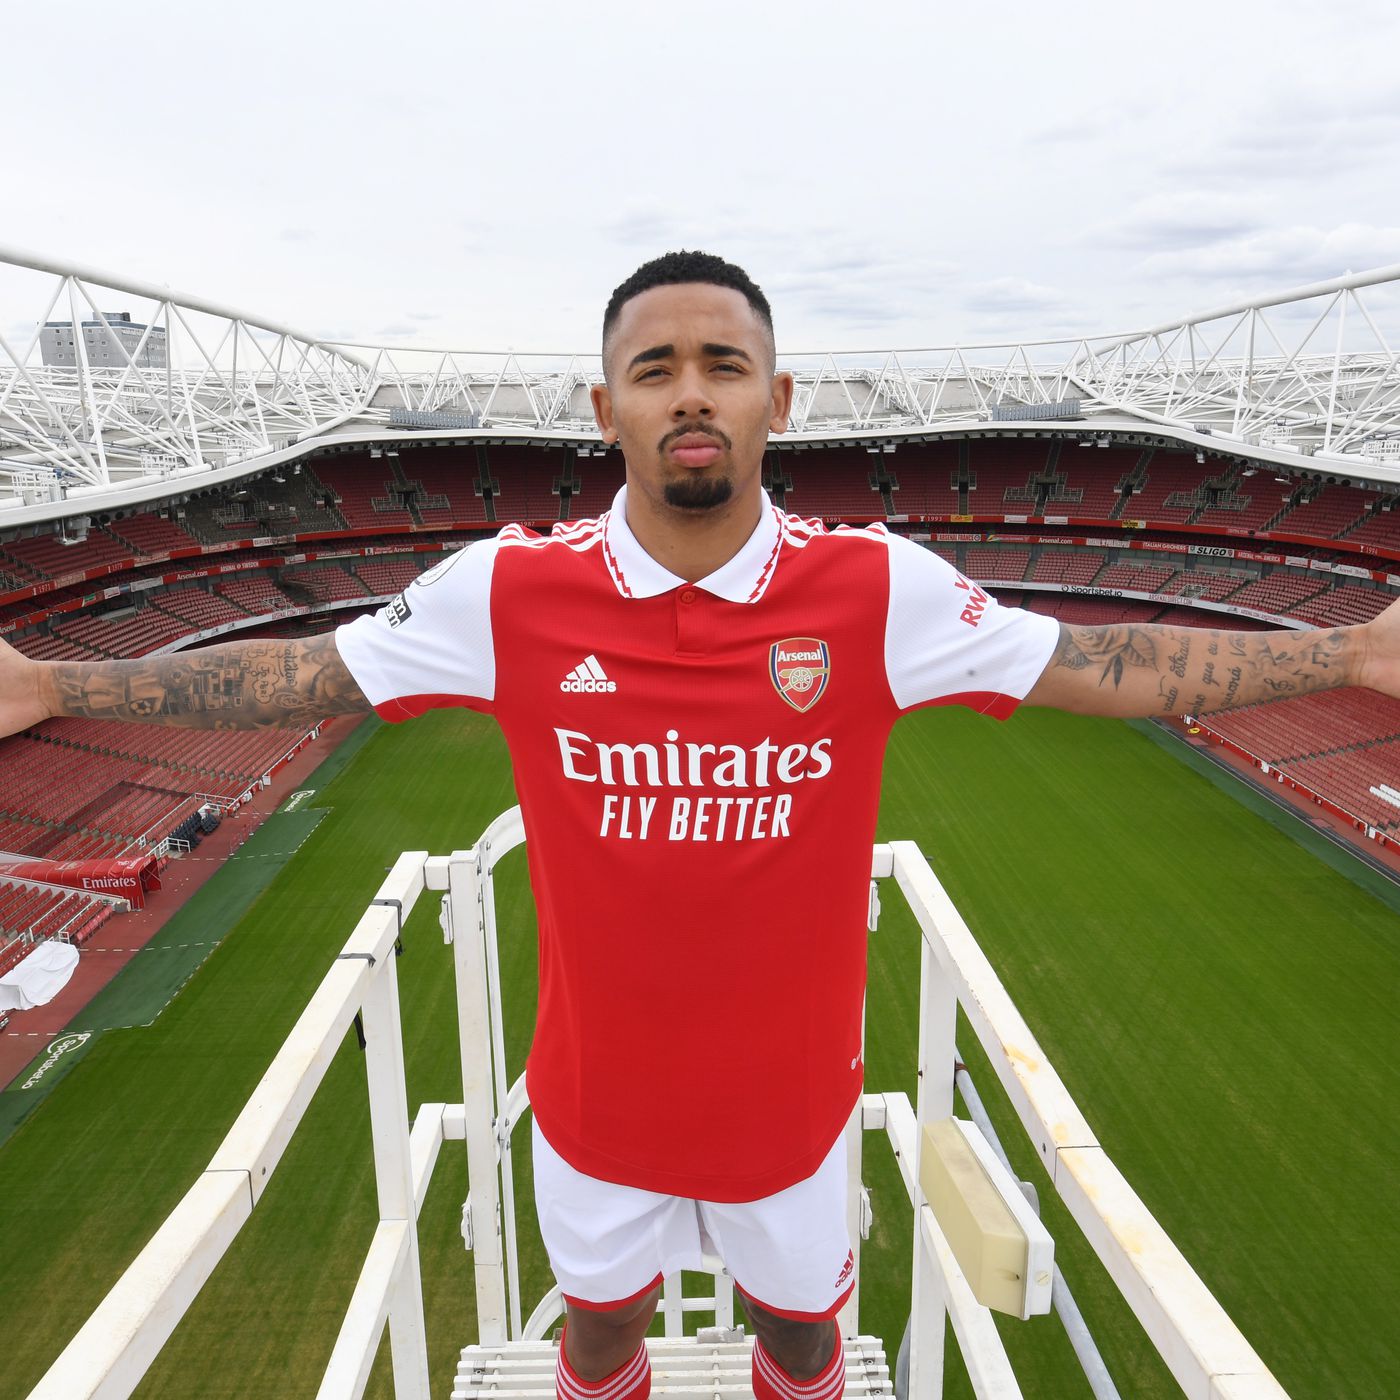 Arsenal announce Gabriel Jesus transfer and signing from Manchester City Short Fuse